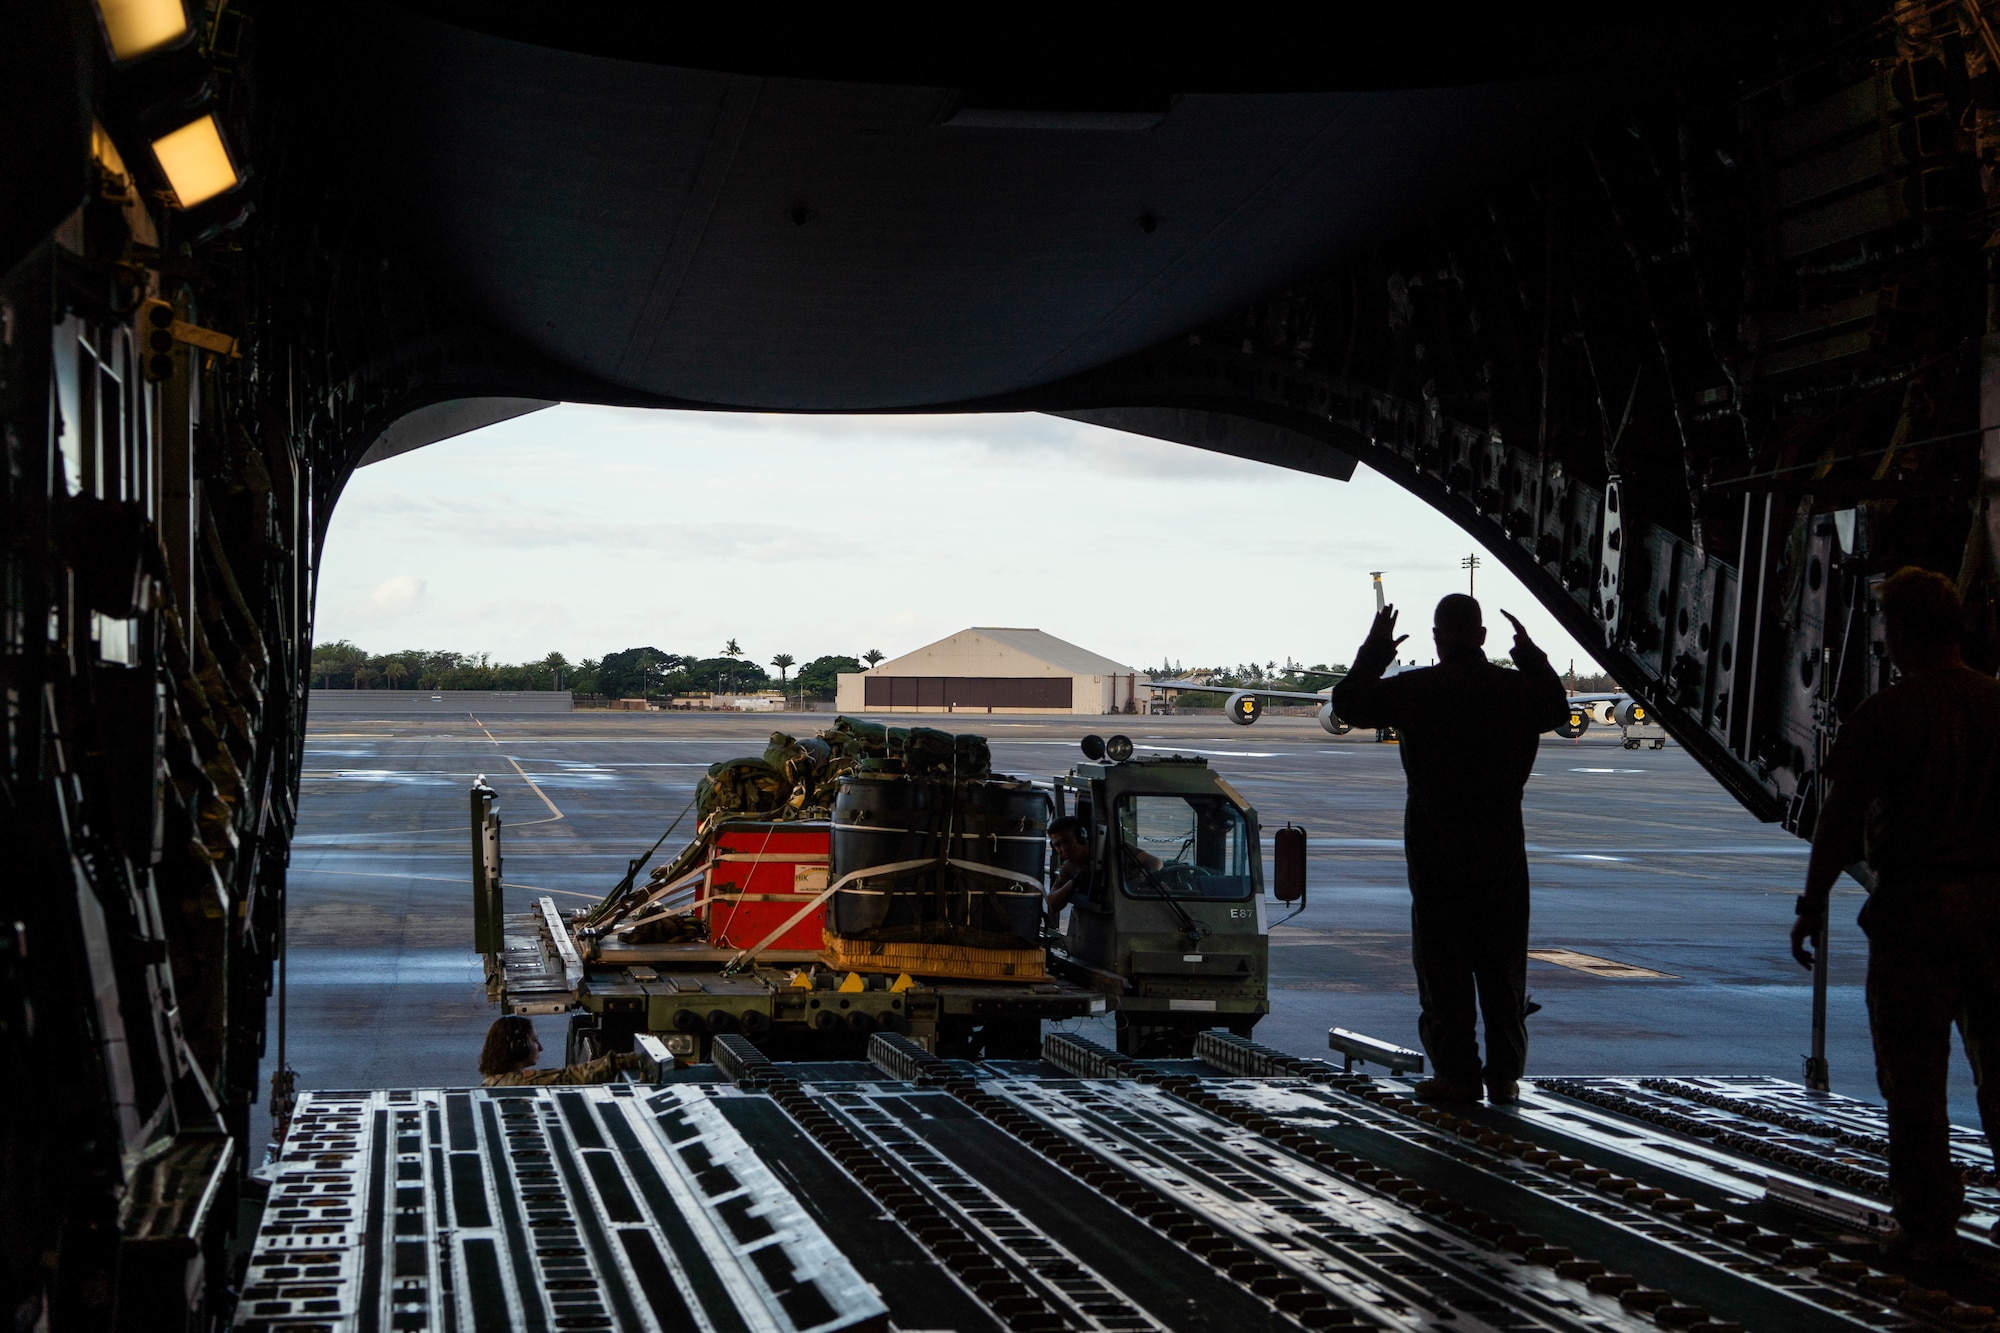 U.S. Air Force Master Sgt. Randall Yamada, 204 Airlift Squadron loadmaster, marshals a Tunner 60K Loader to the ramp of a C-17 Globemaster III before takeoff during Exercise Global Dexterity 2022 at Joint Base Pearl Harbor-Hickam, Hawaii, May 4, 2022. The Royal Australian Air Force visited JBPHH to join both active duty and National Guard C-17s for training missions around the Hawaiian Islands to develop tactical airlift and airdrop capabilities. (U.S. Air Force photo by Airman 1st Class Makensie Cooper)